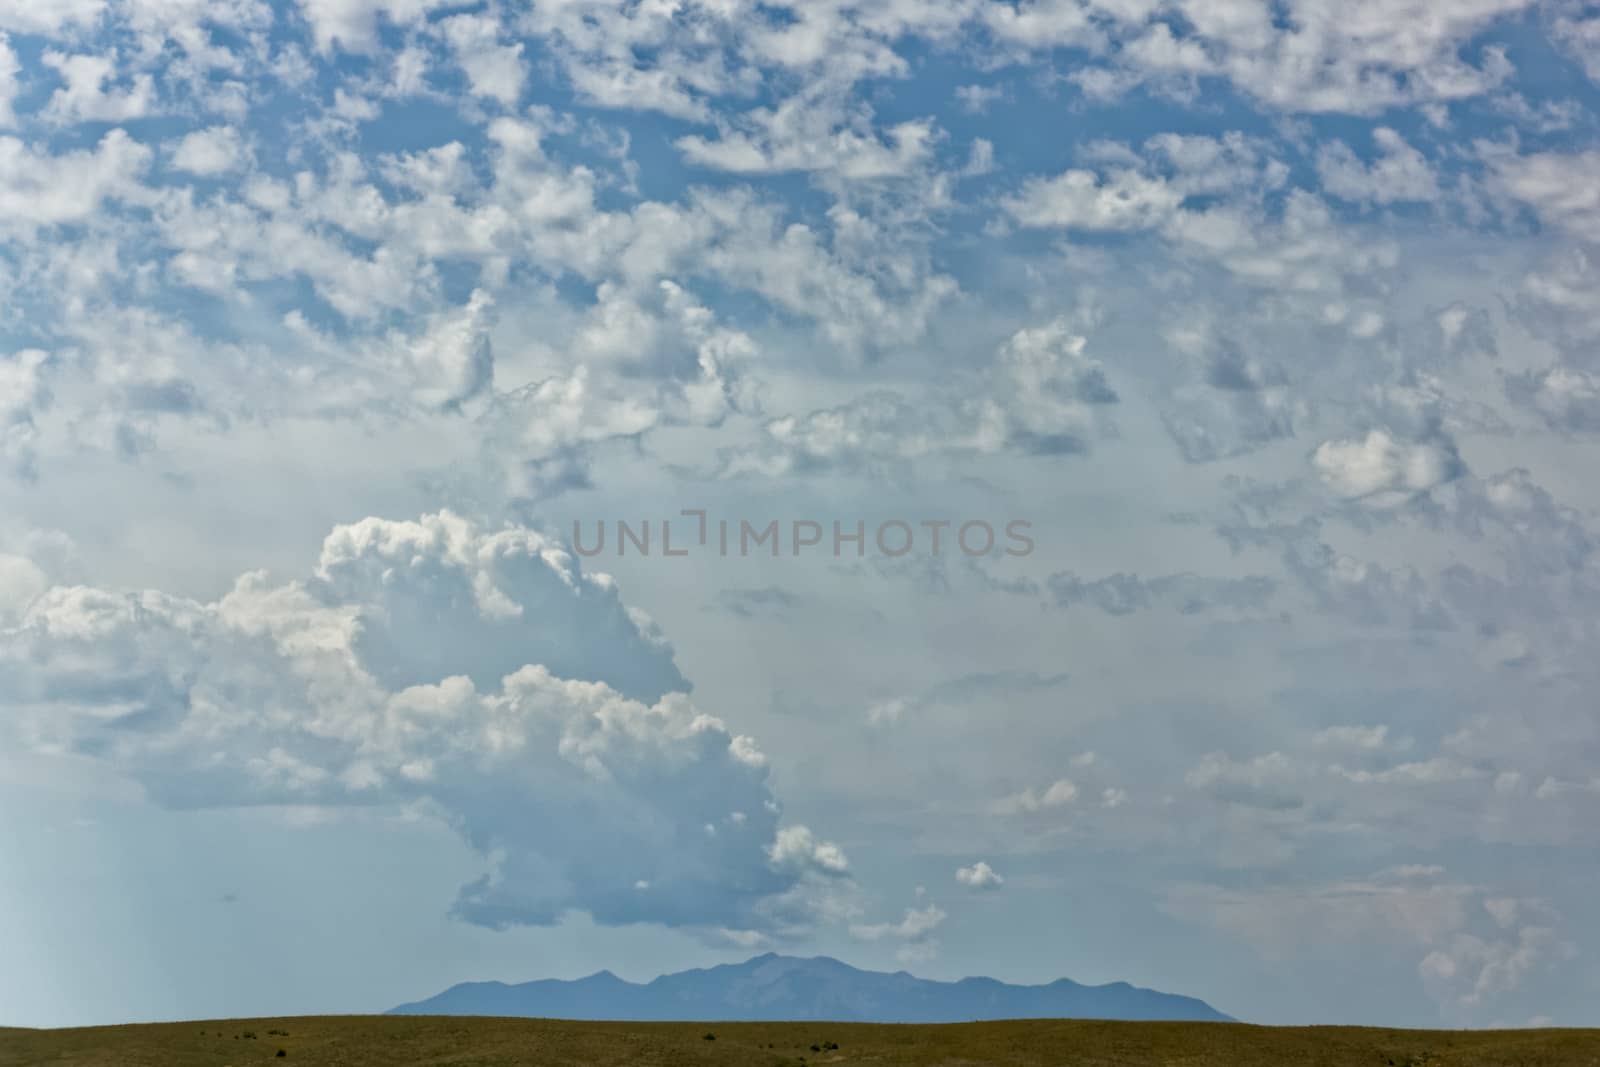 A distant mountain with beautiful clouds and sunlight overhead